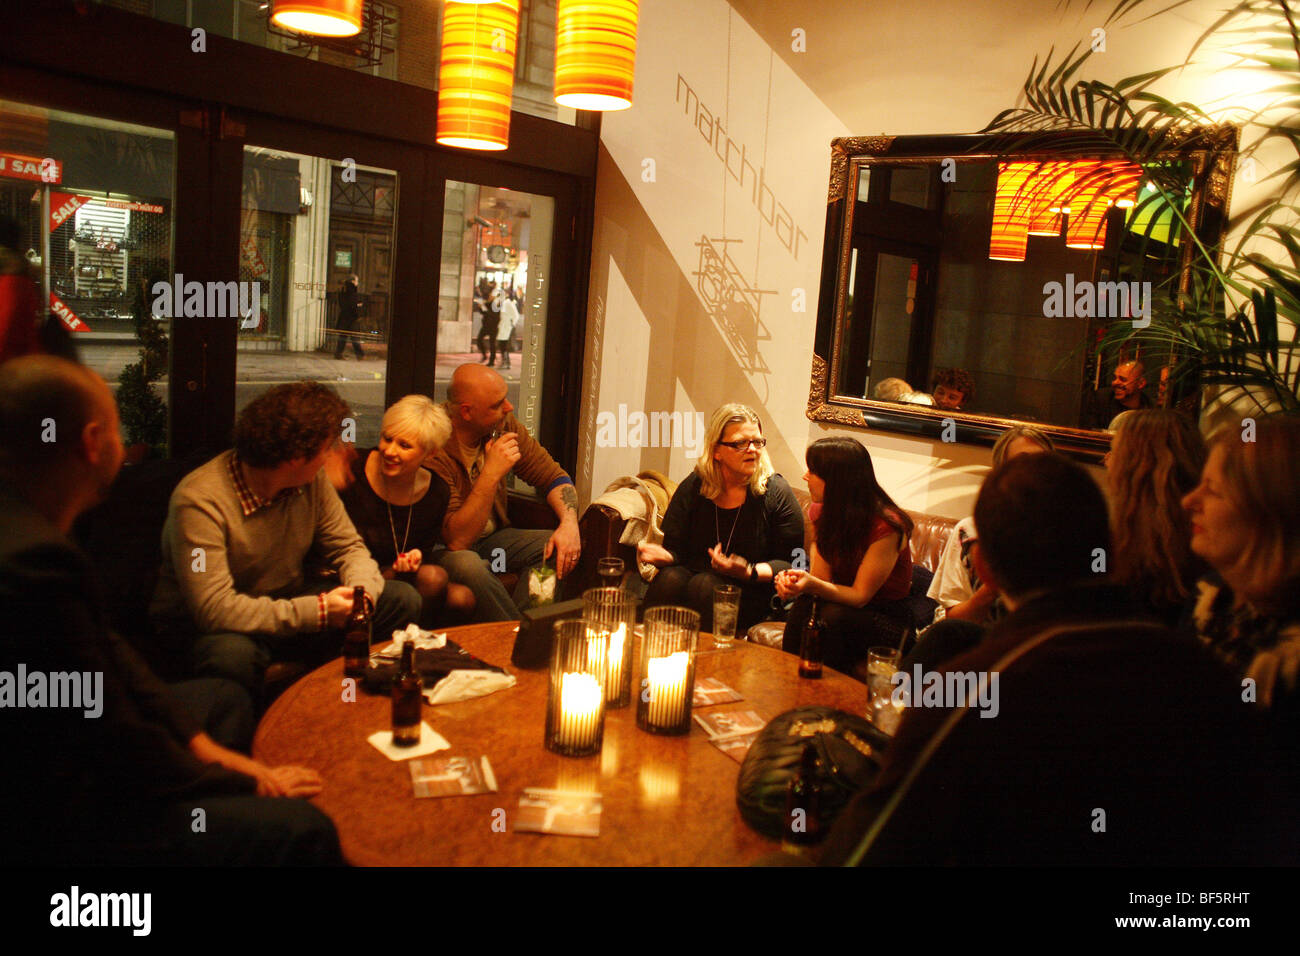 Drinkers and socialites in Matchbar, Central London. Stock Photo